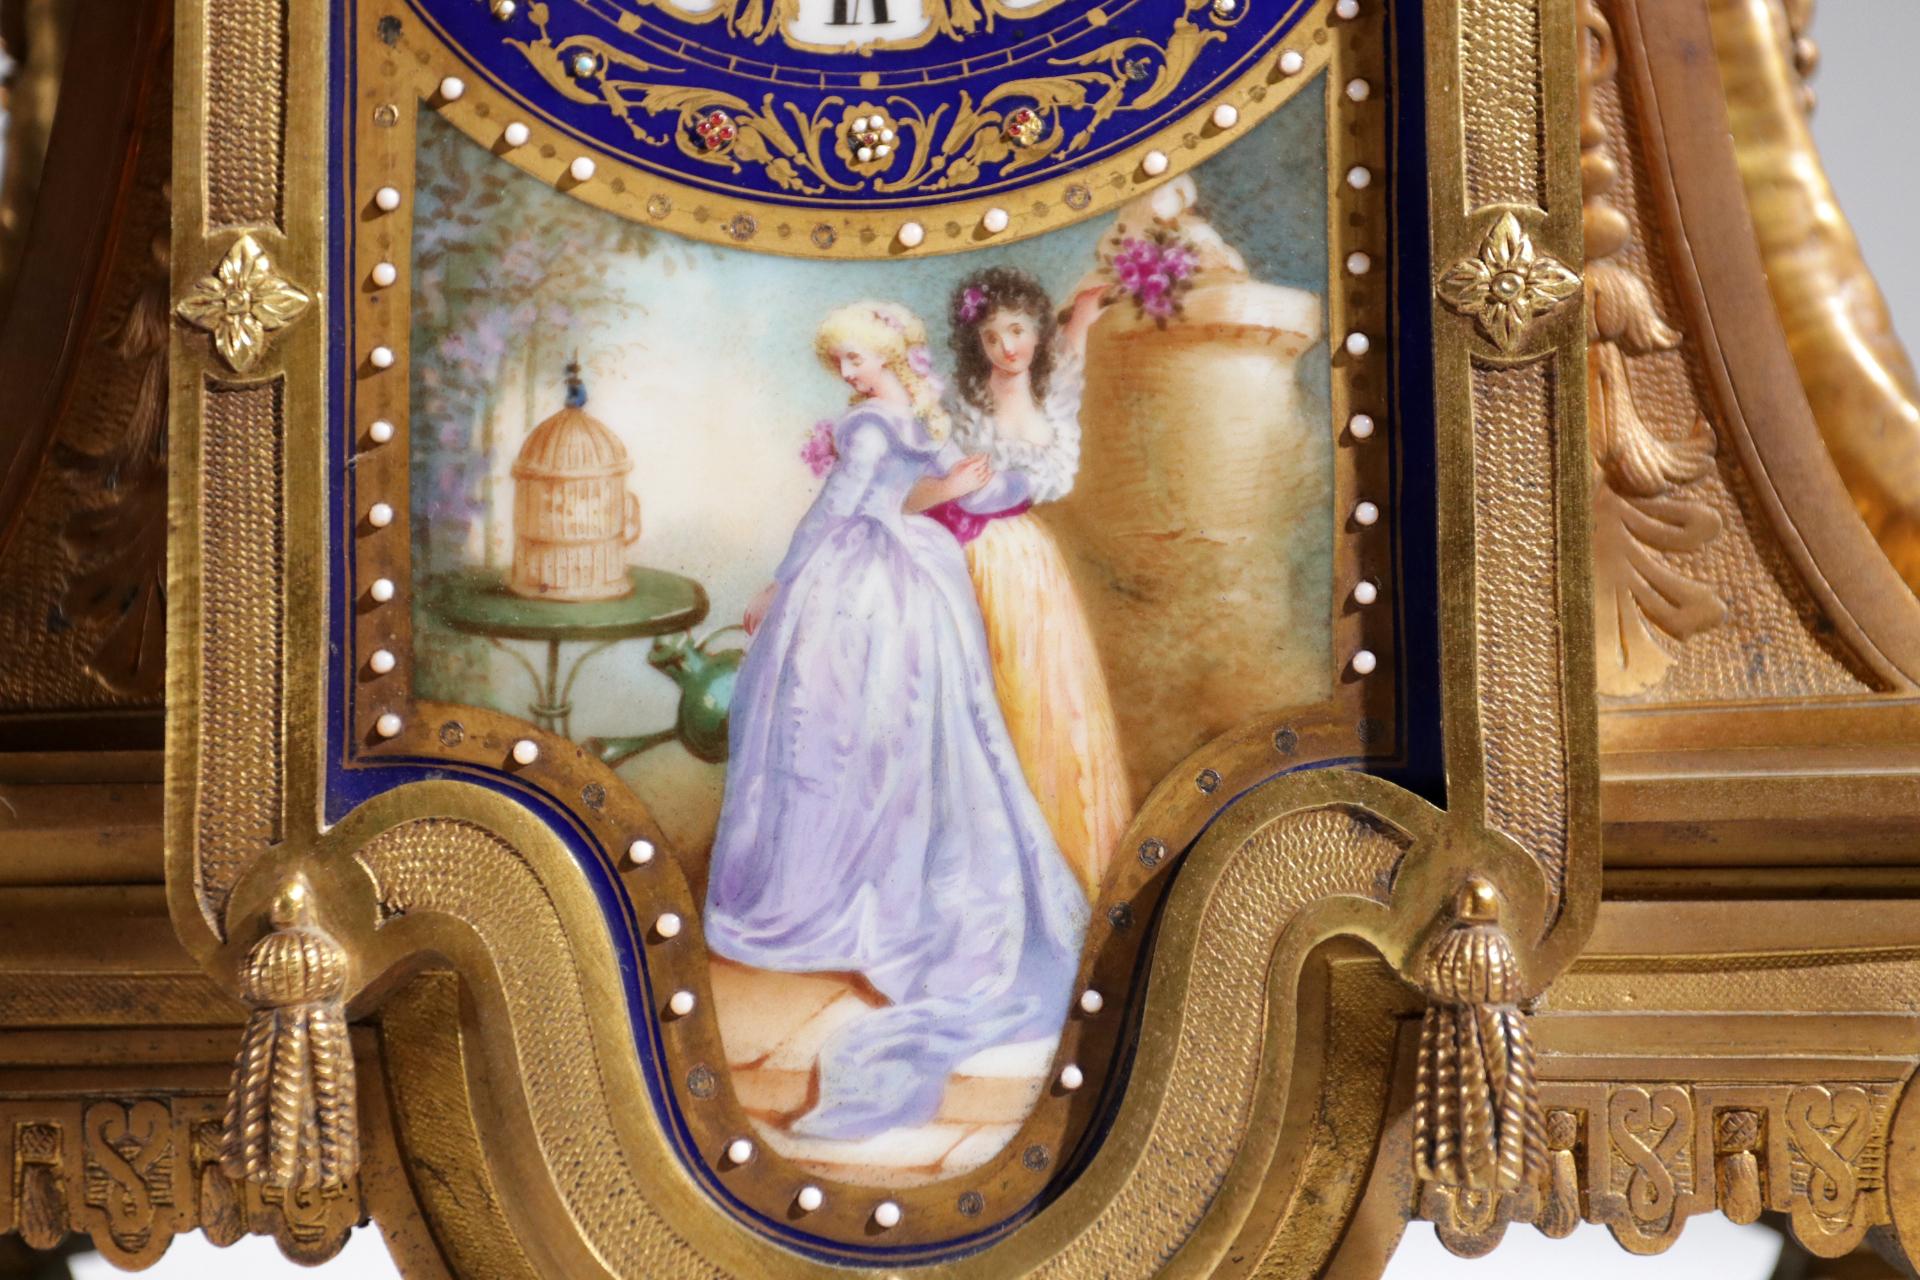 Beautiful 18th century Rococo manner gilt bronze mantel clock with elegant Sèvres style bleu / navy colored porcelain.
The porcelain is very delicately hand painted with a landscape on one side of the vases and figures on a staircase on the